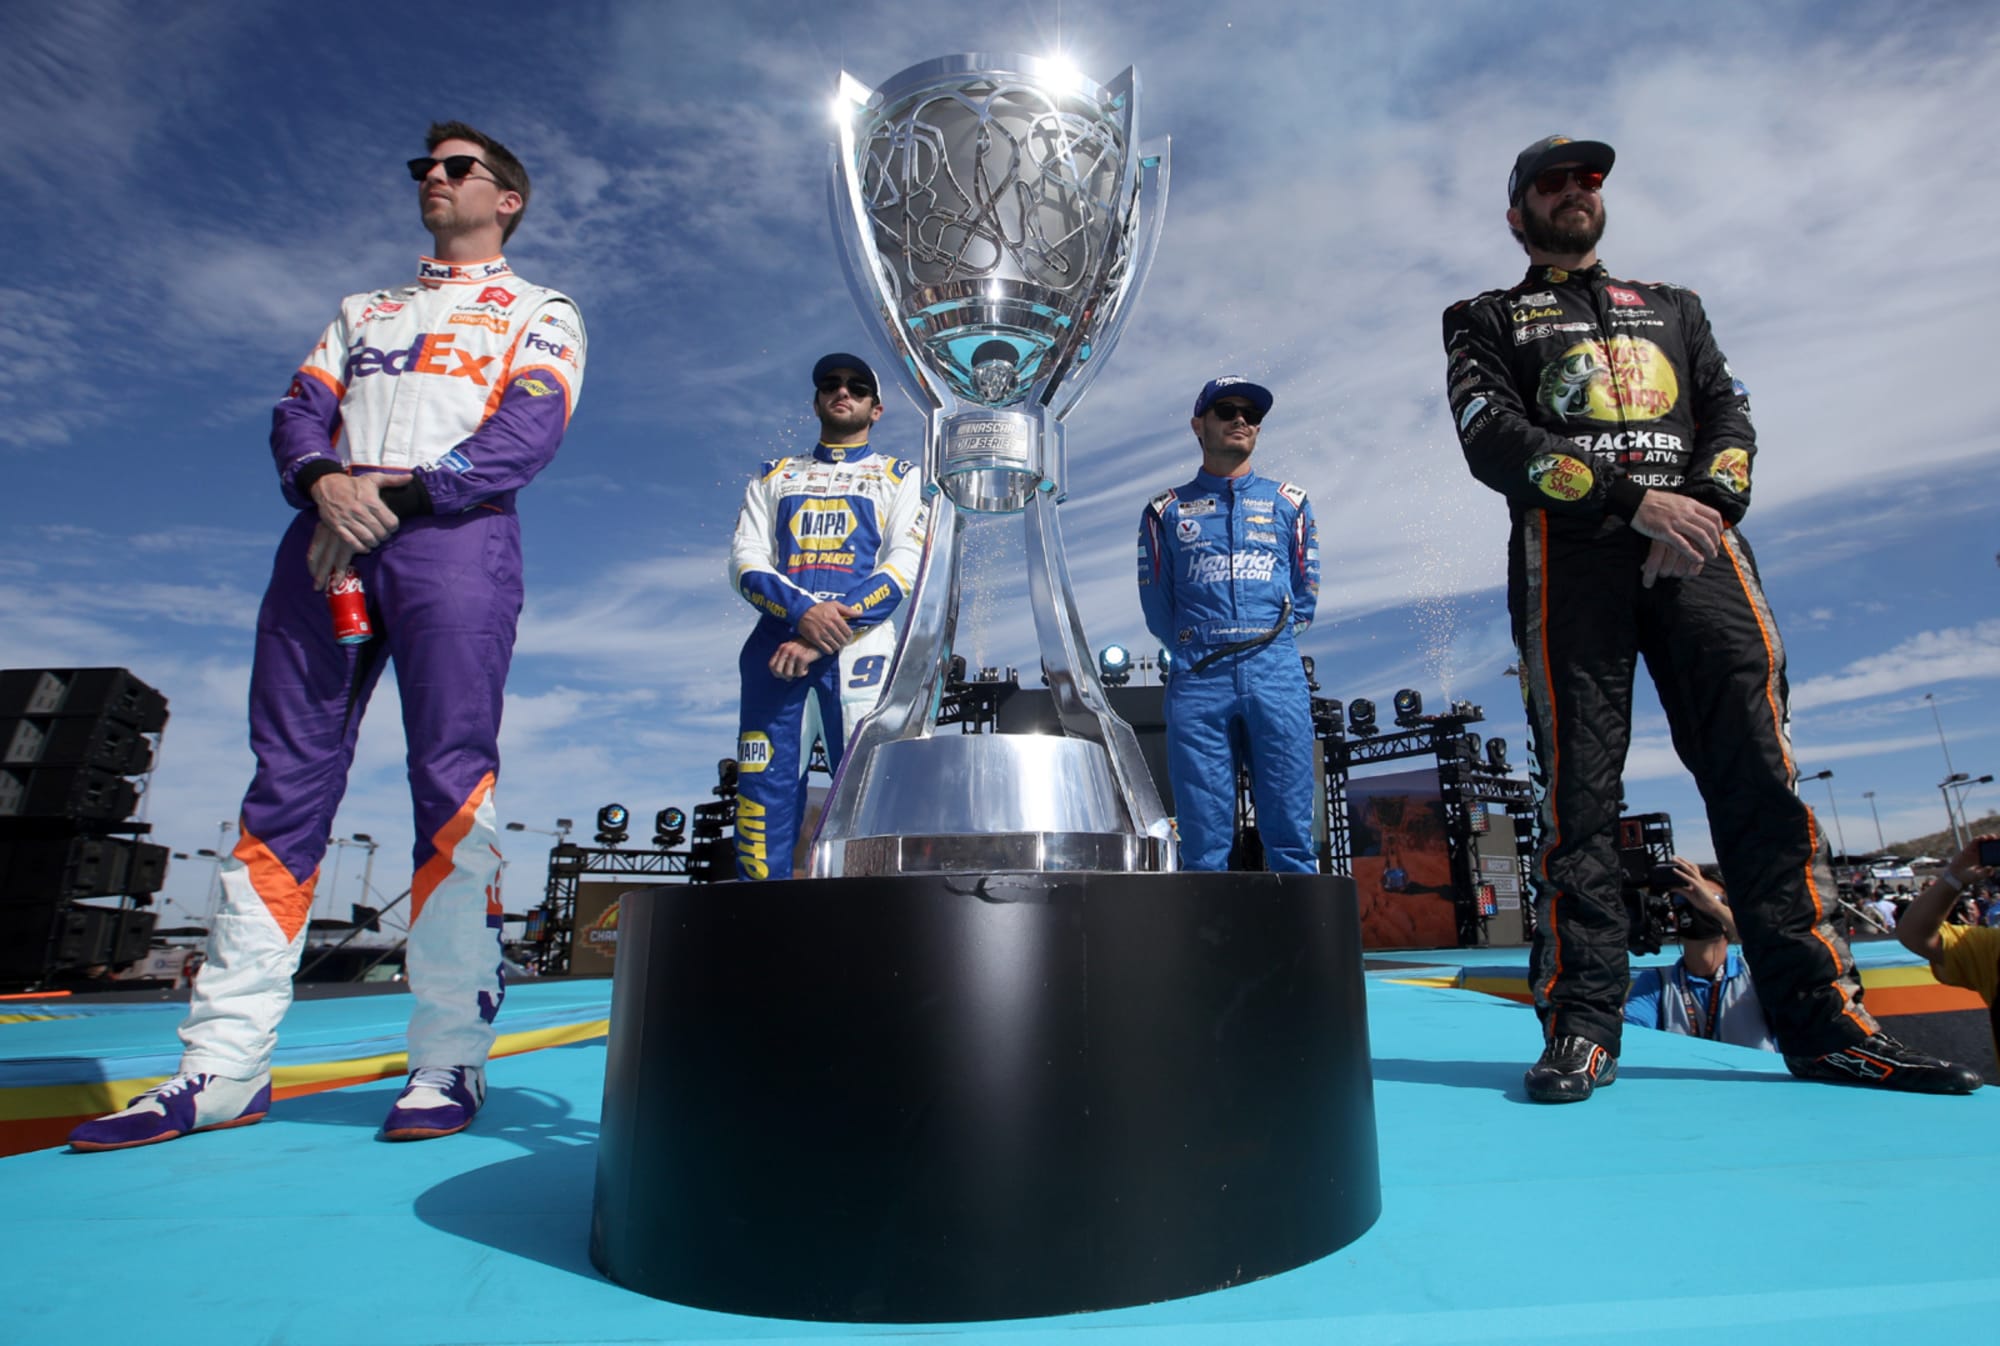 full-nascar-point-standings-for-2021-if-there-were-no-playoffs